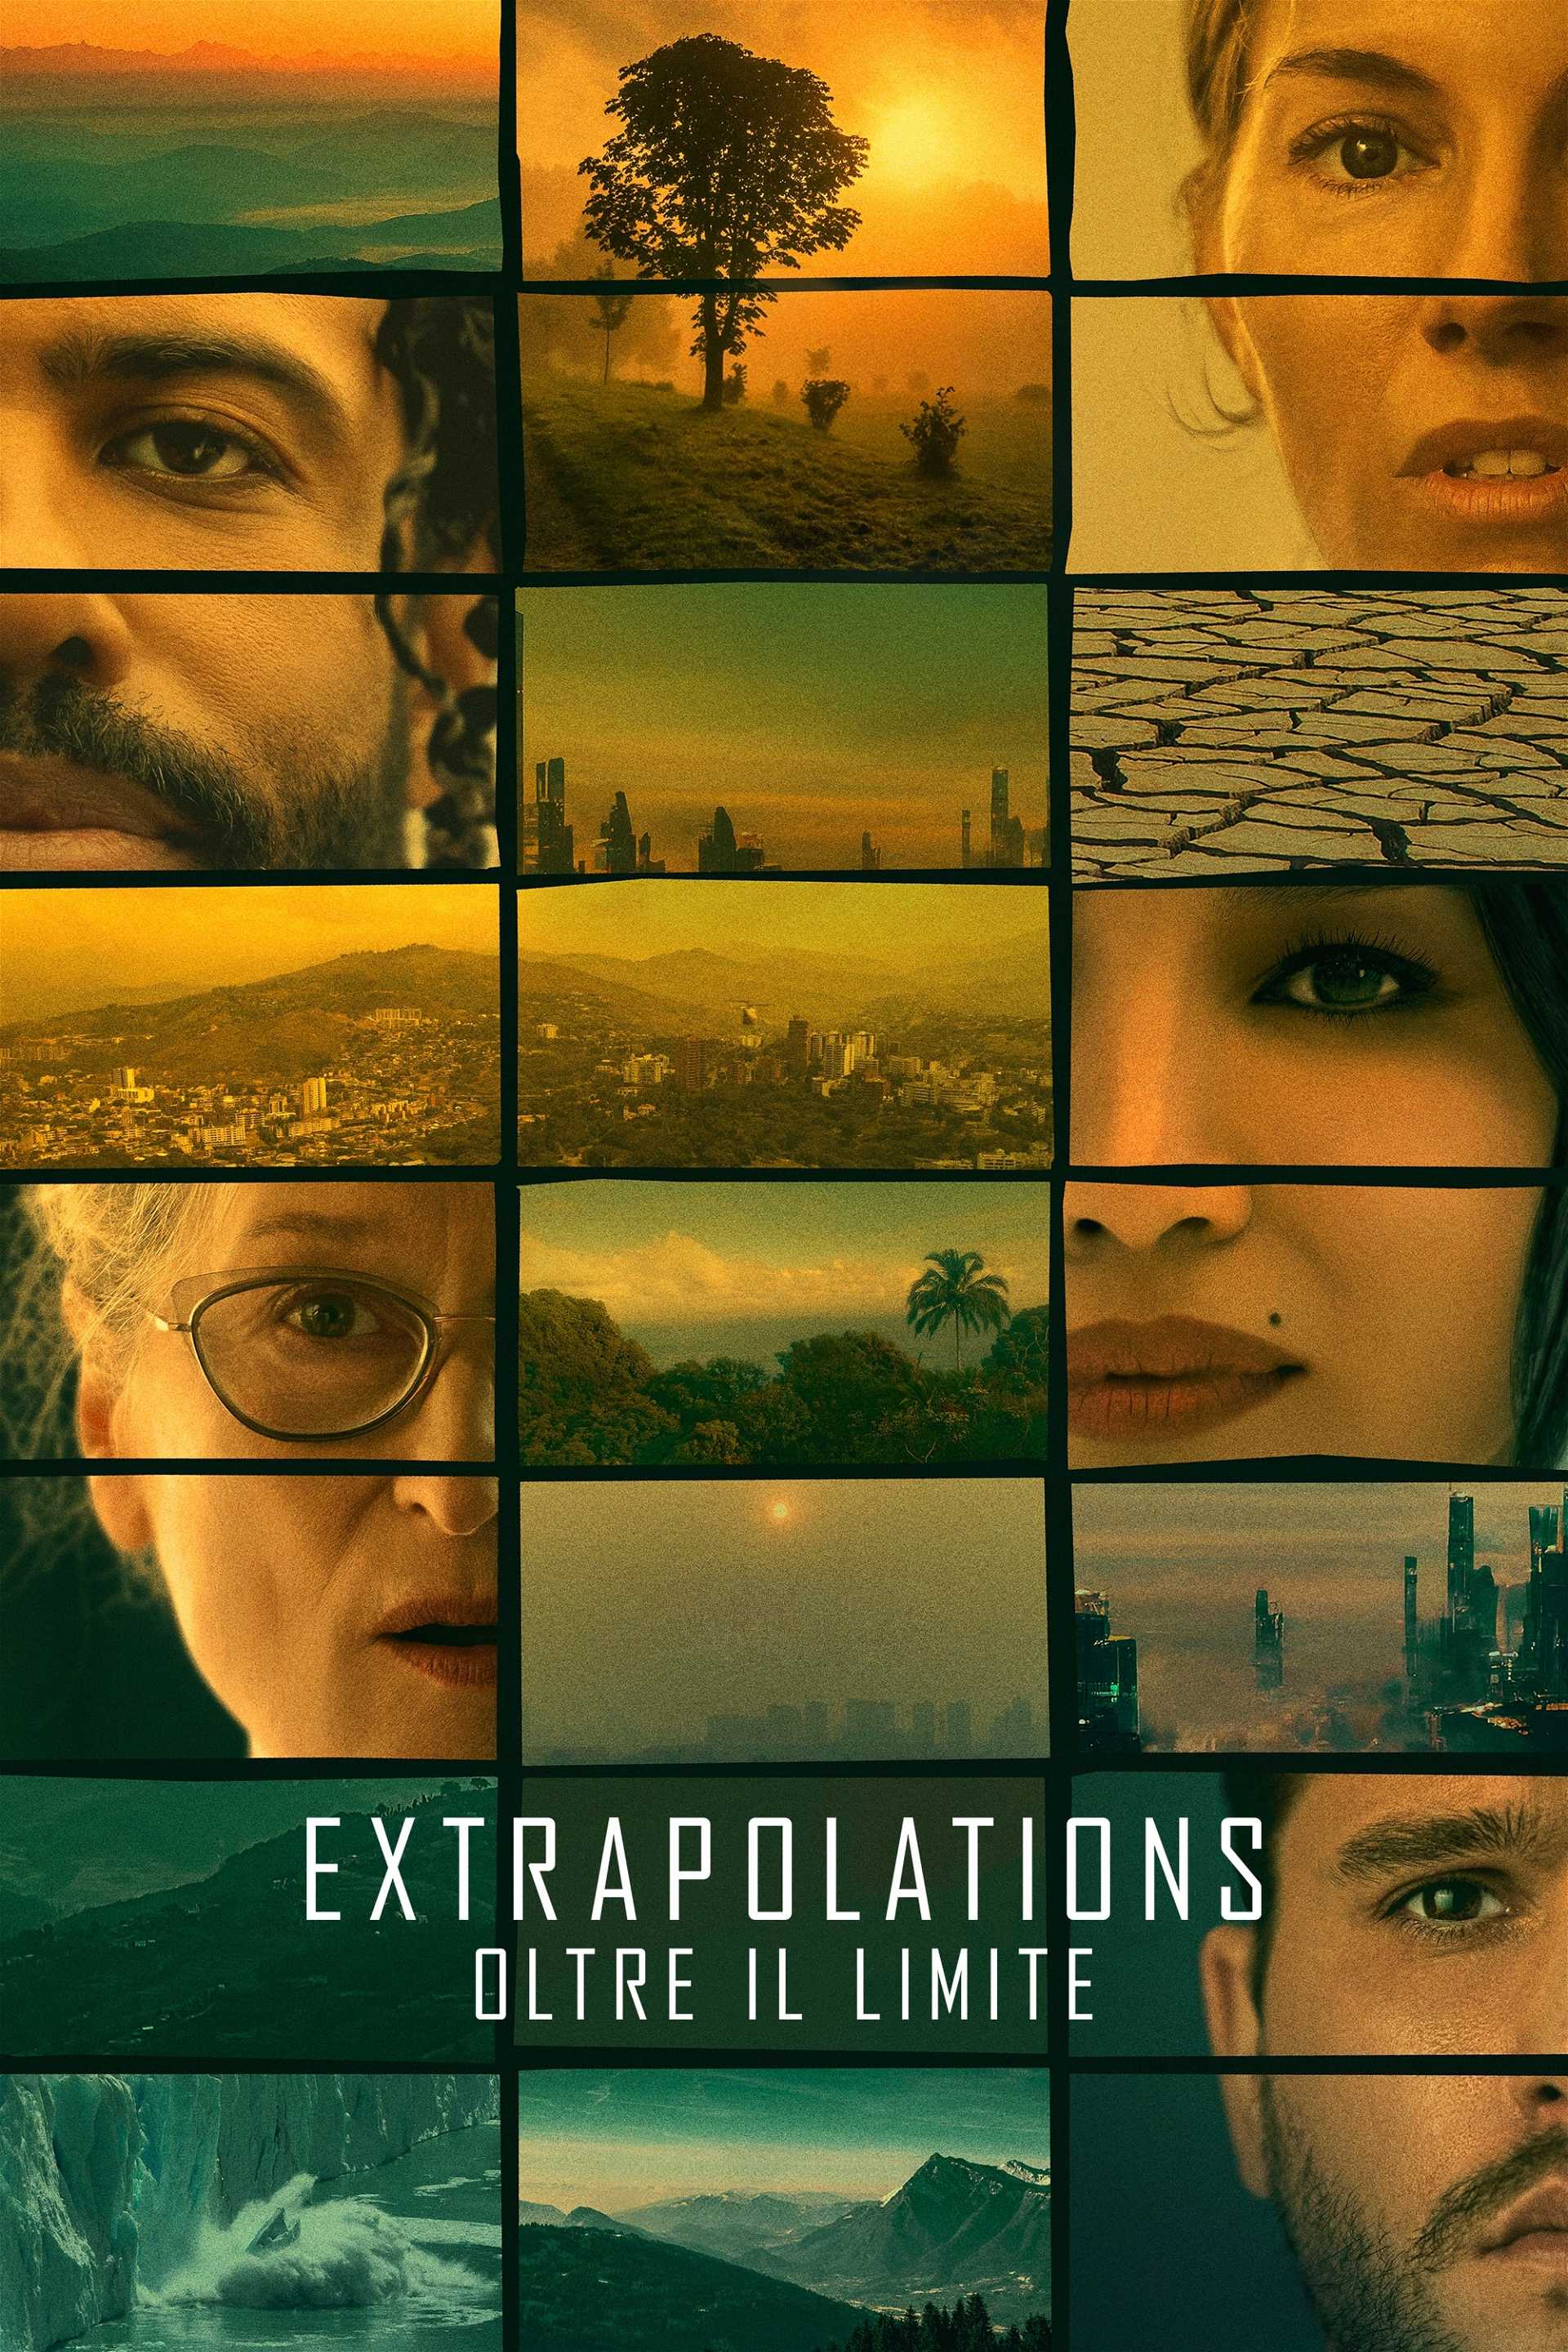 Extrapolations - Oltre il limite in streaming